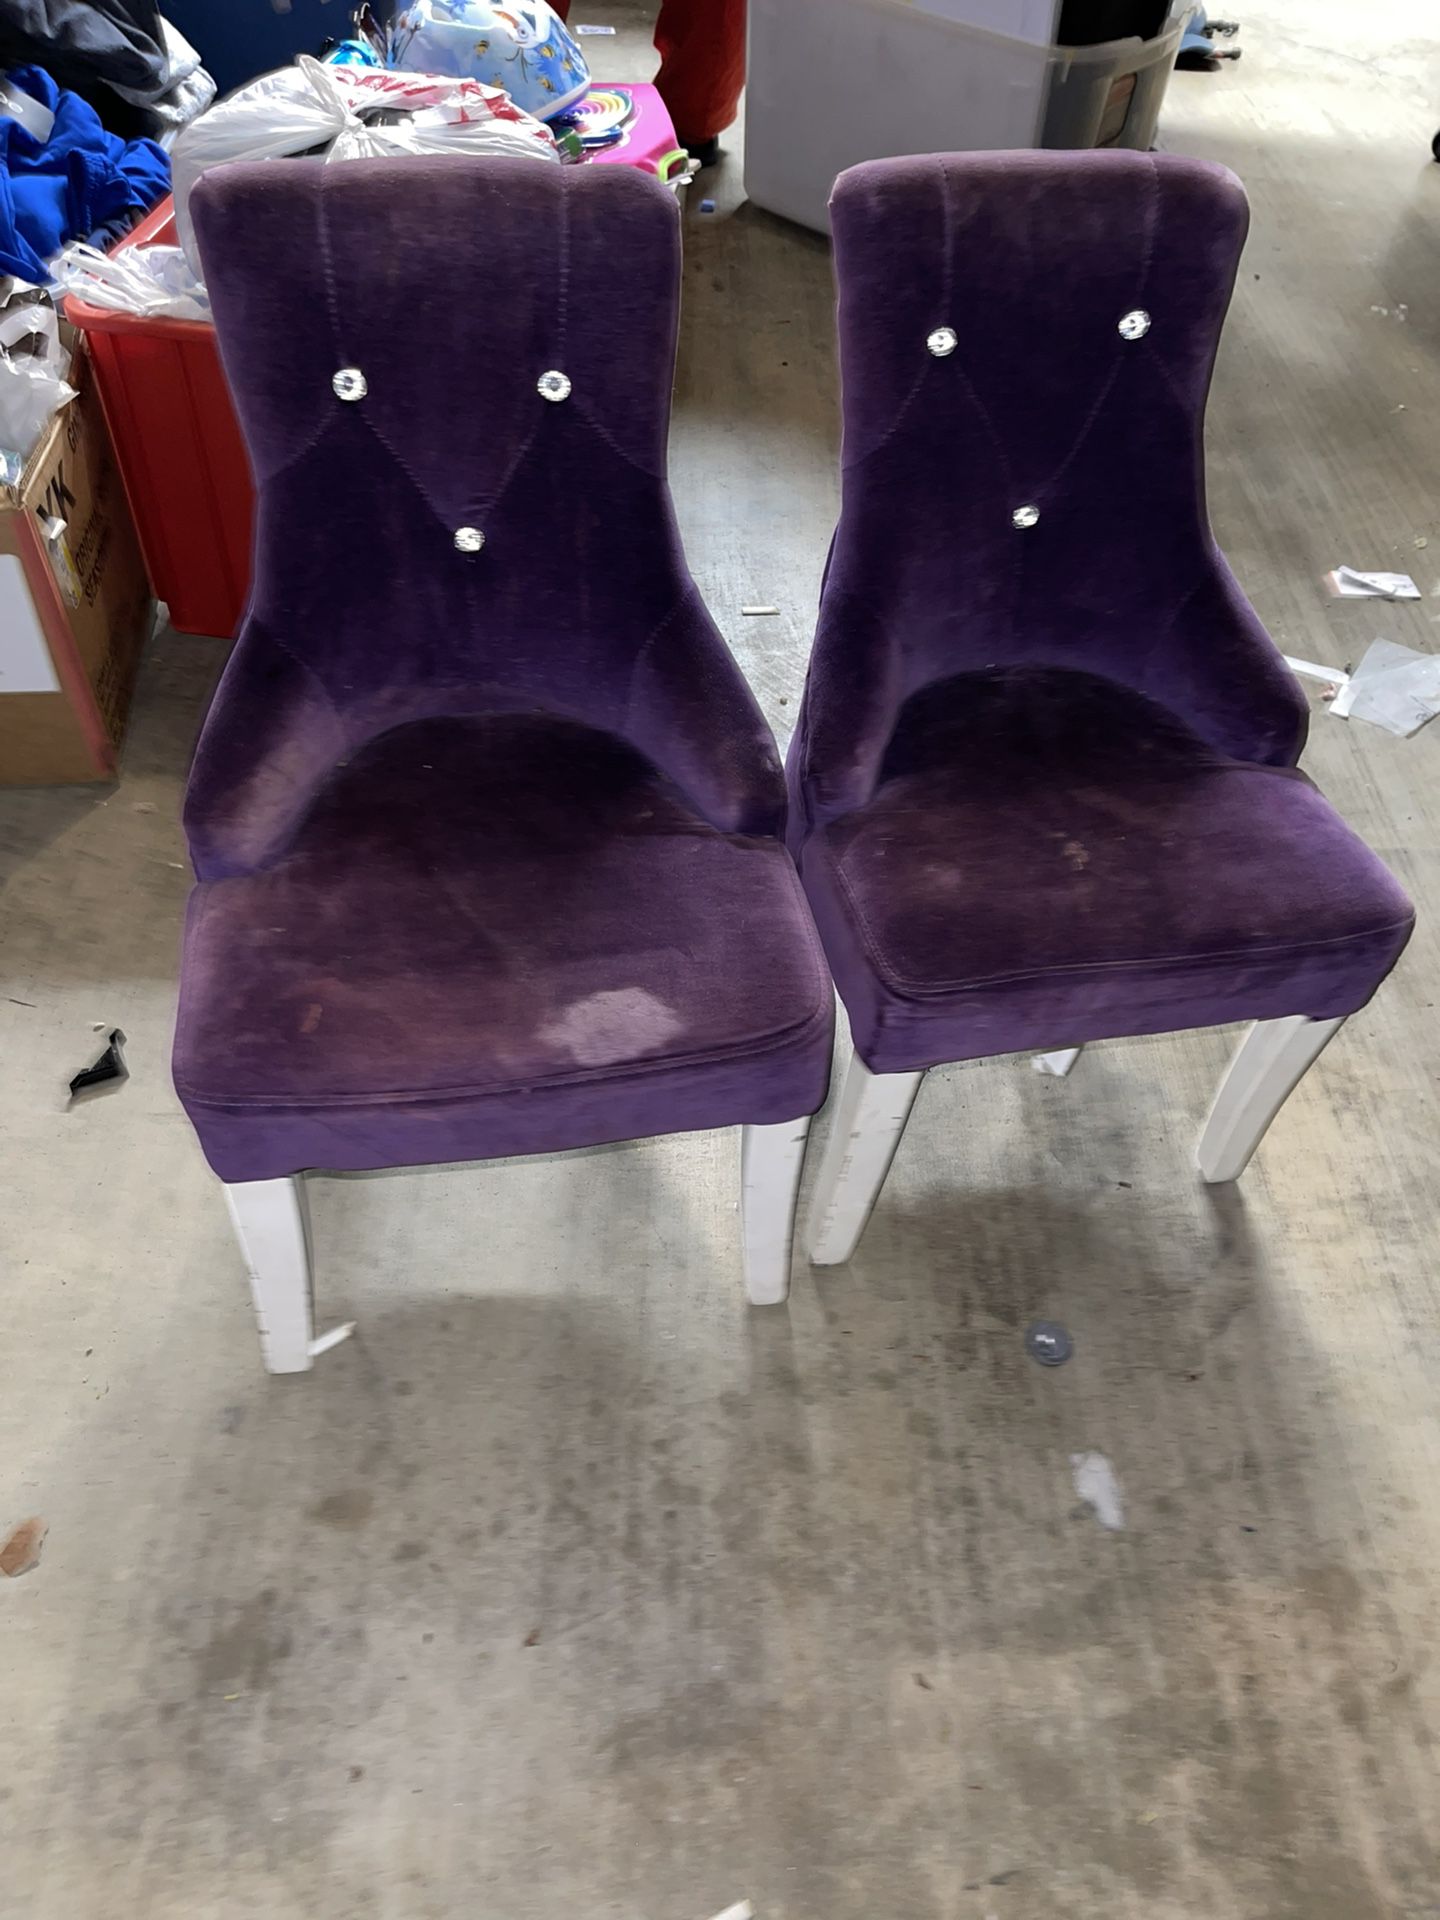 Kids Chair 2 For $15